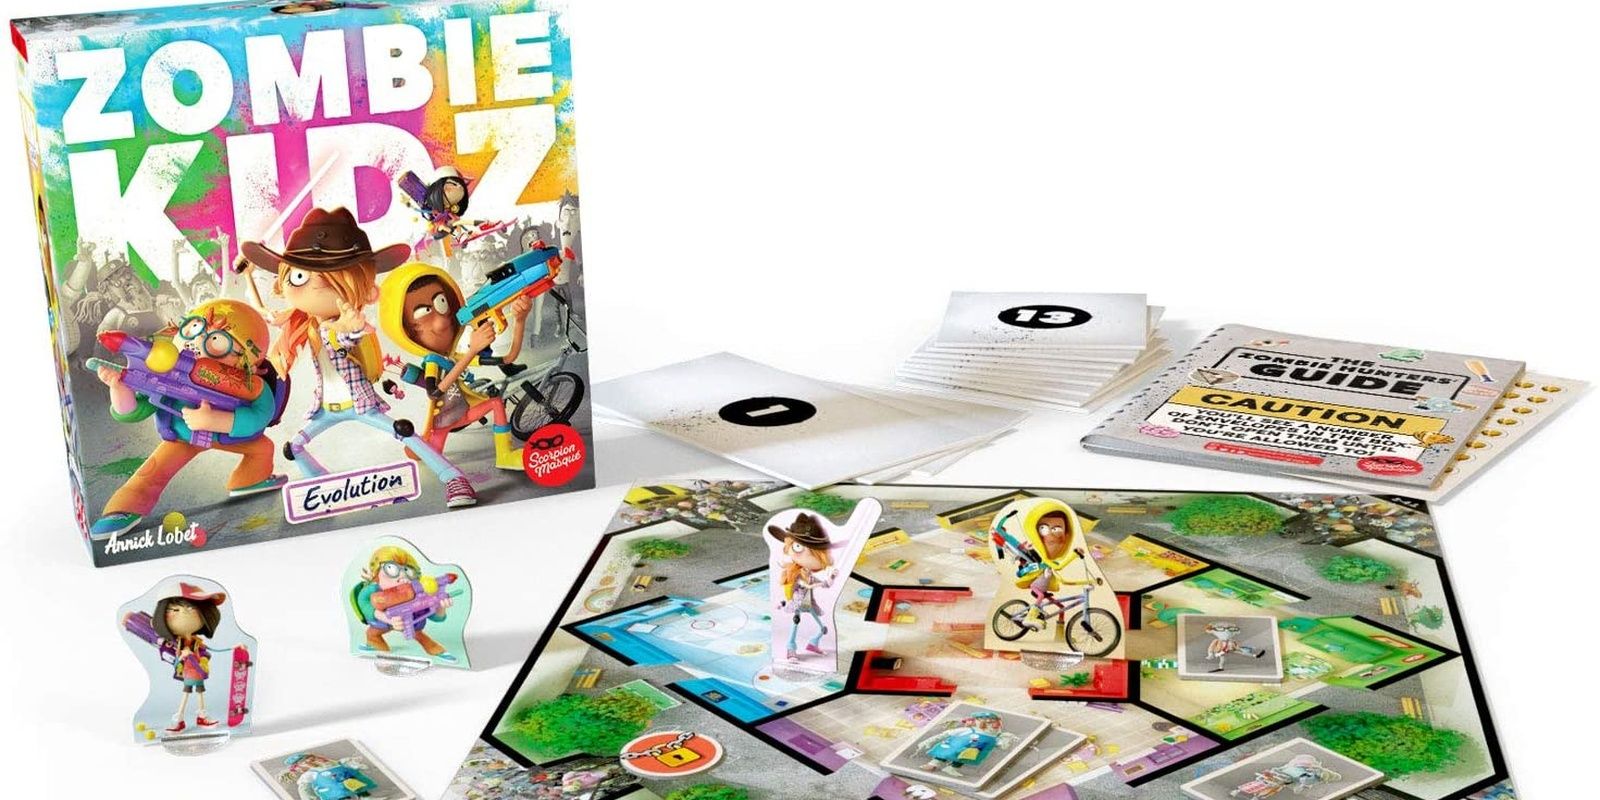 Zombie Kidz Evolution Board Game Components In The Box And Cover Artwork